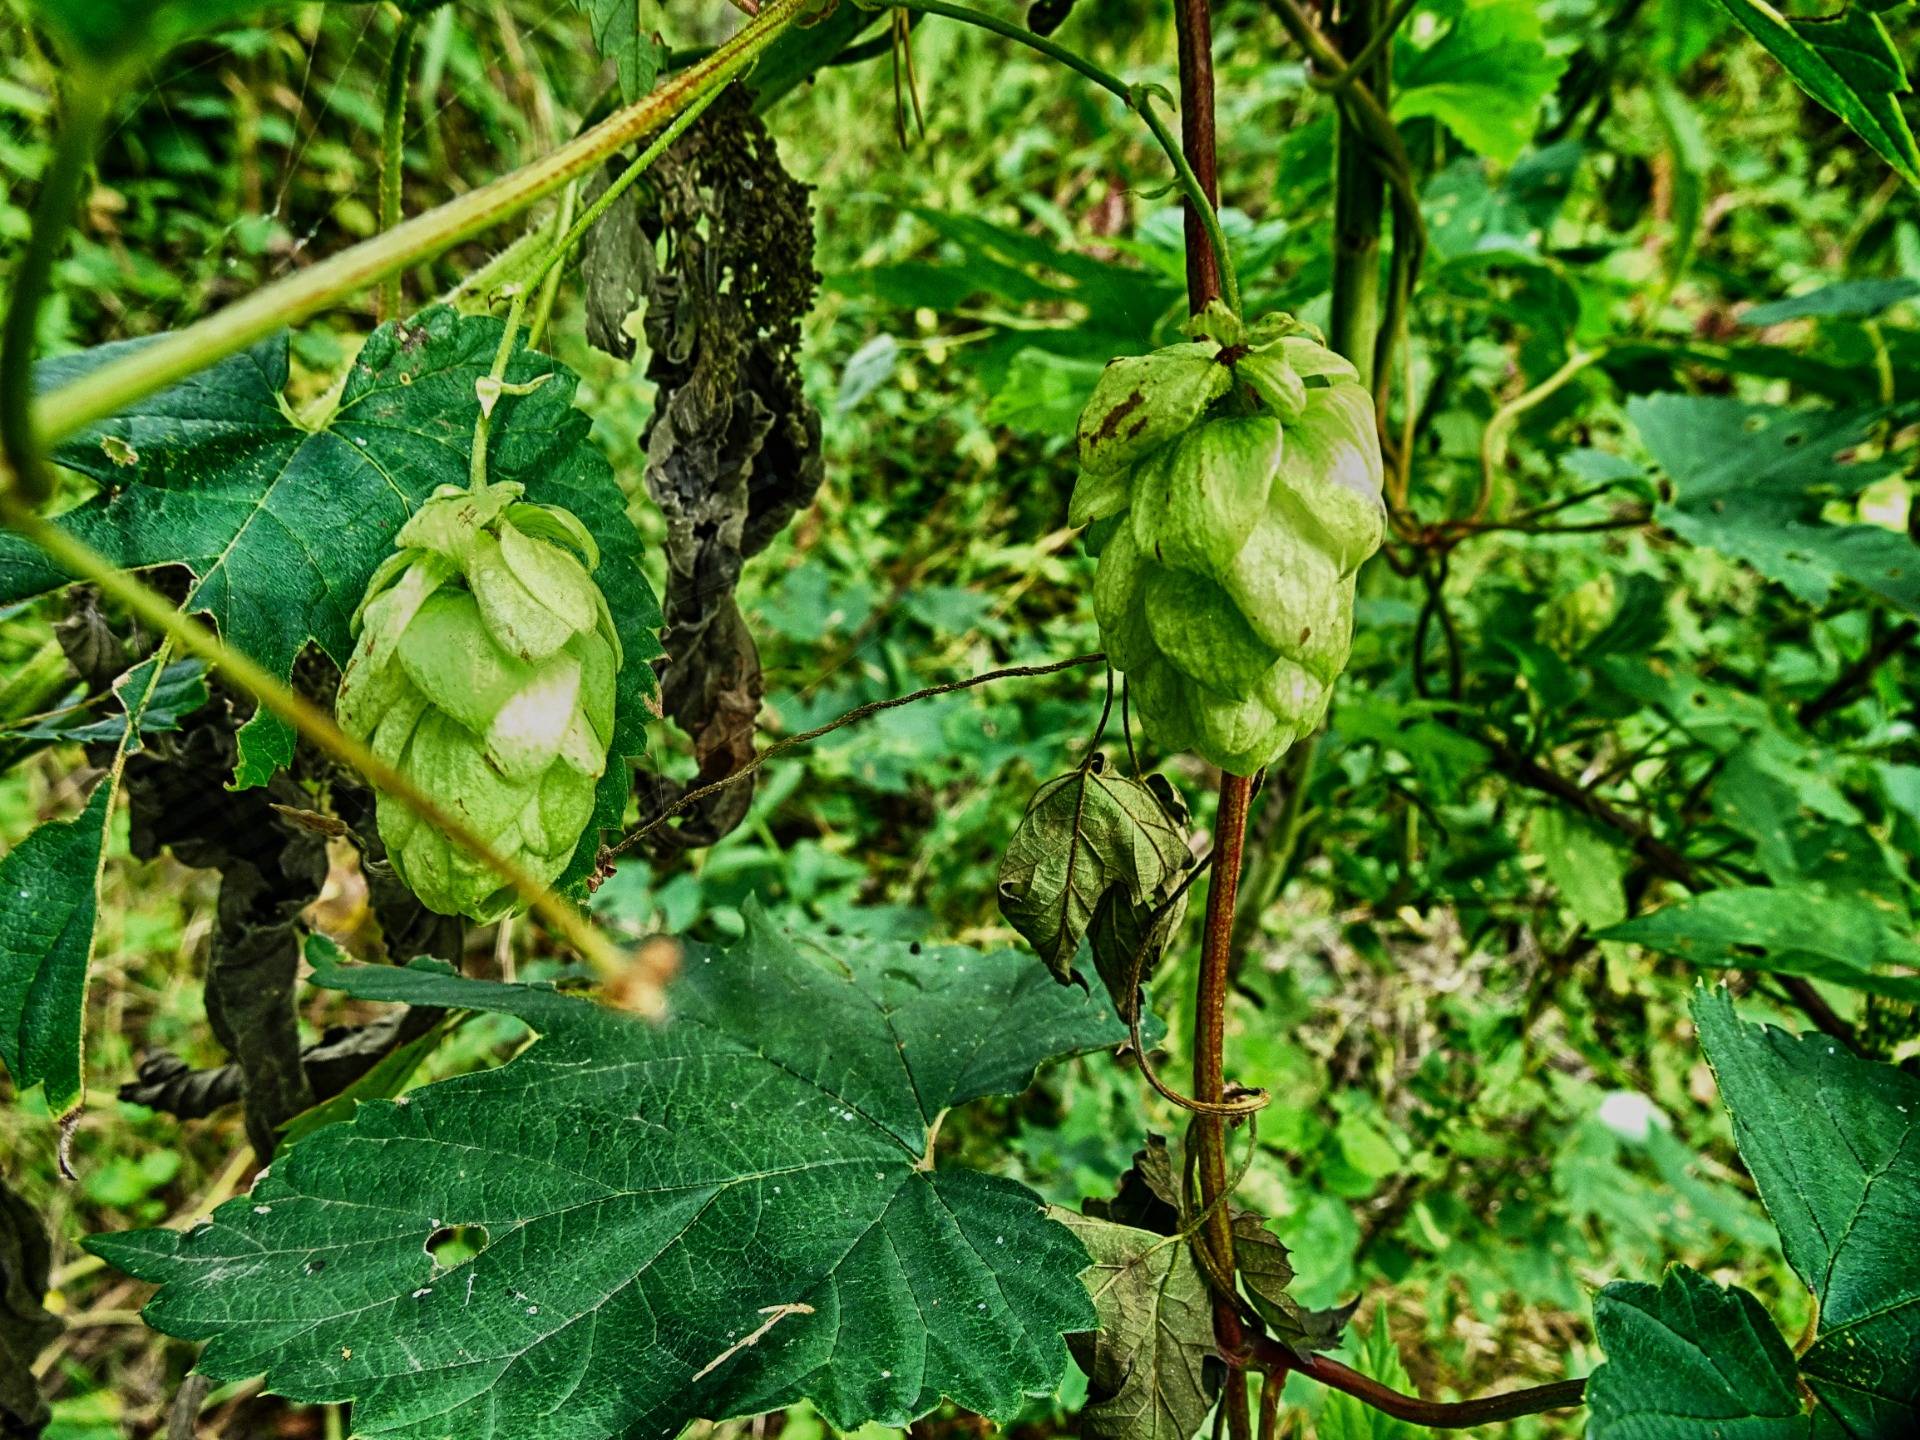 You can see wild hops growing everywhere